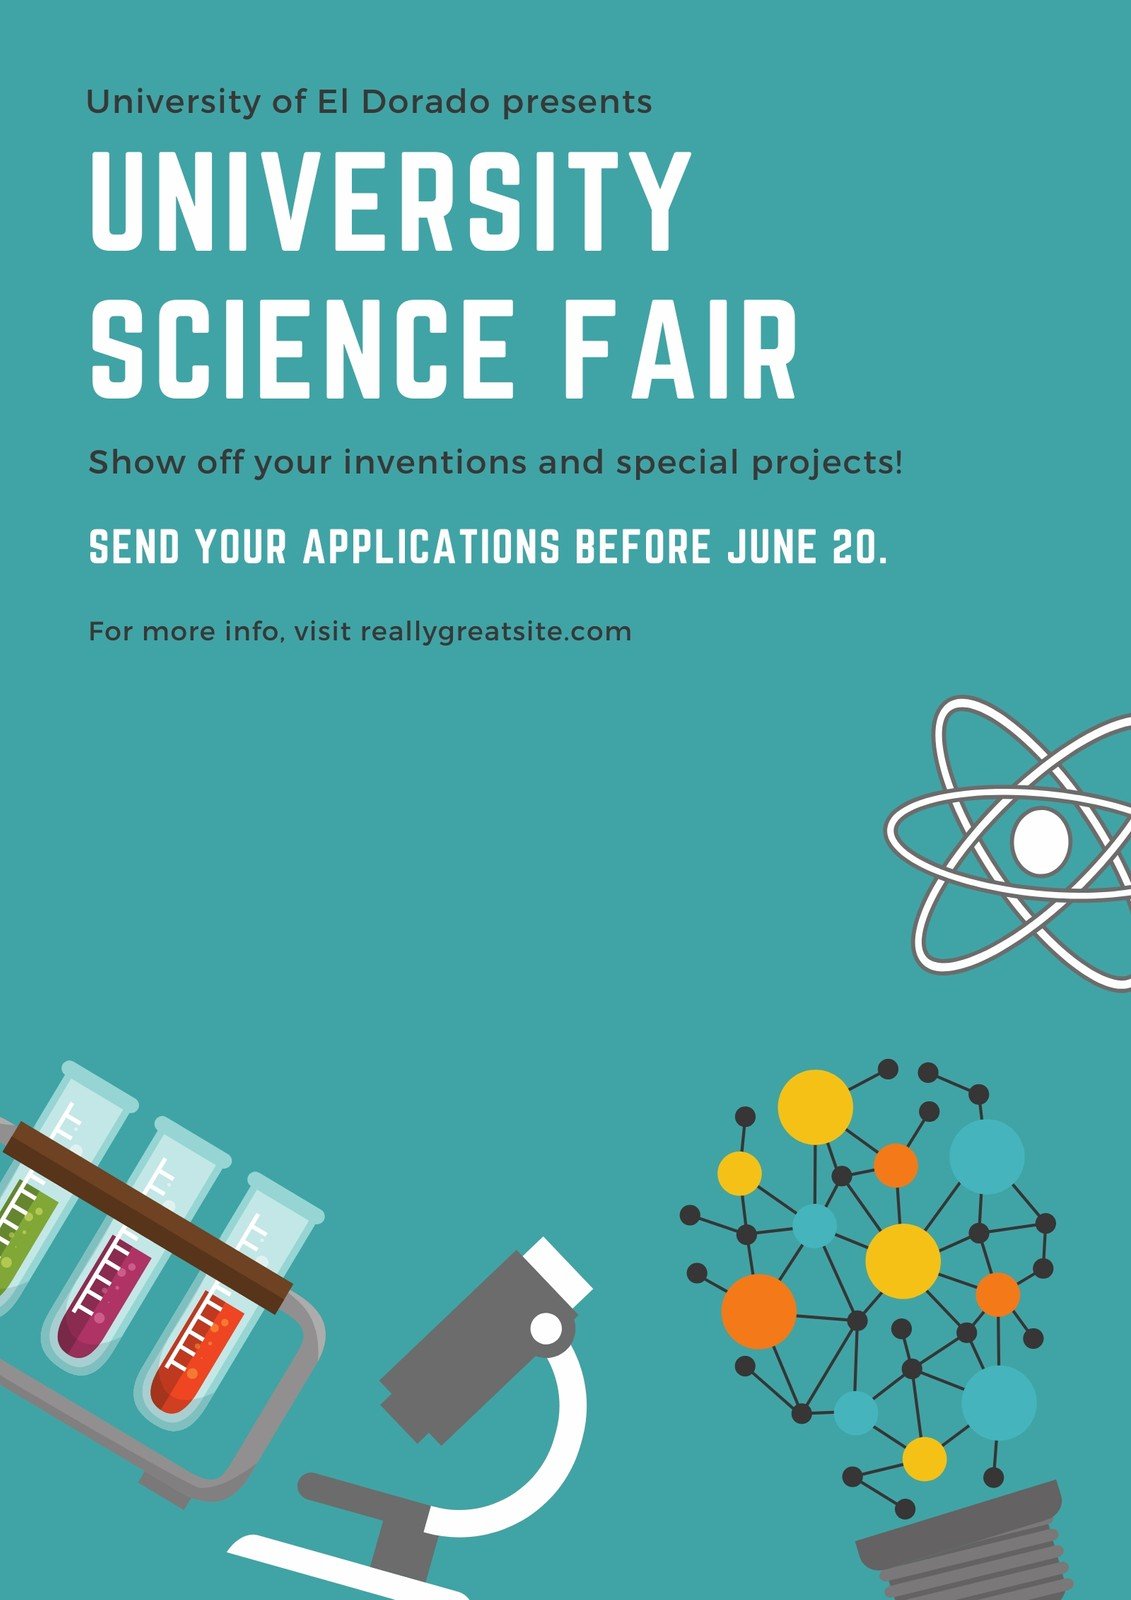 Customize 23+ Science Fair Posters Templates Online - Canva With Science Fair Banner Template